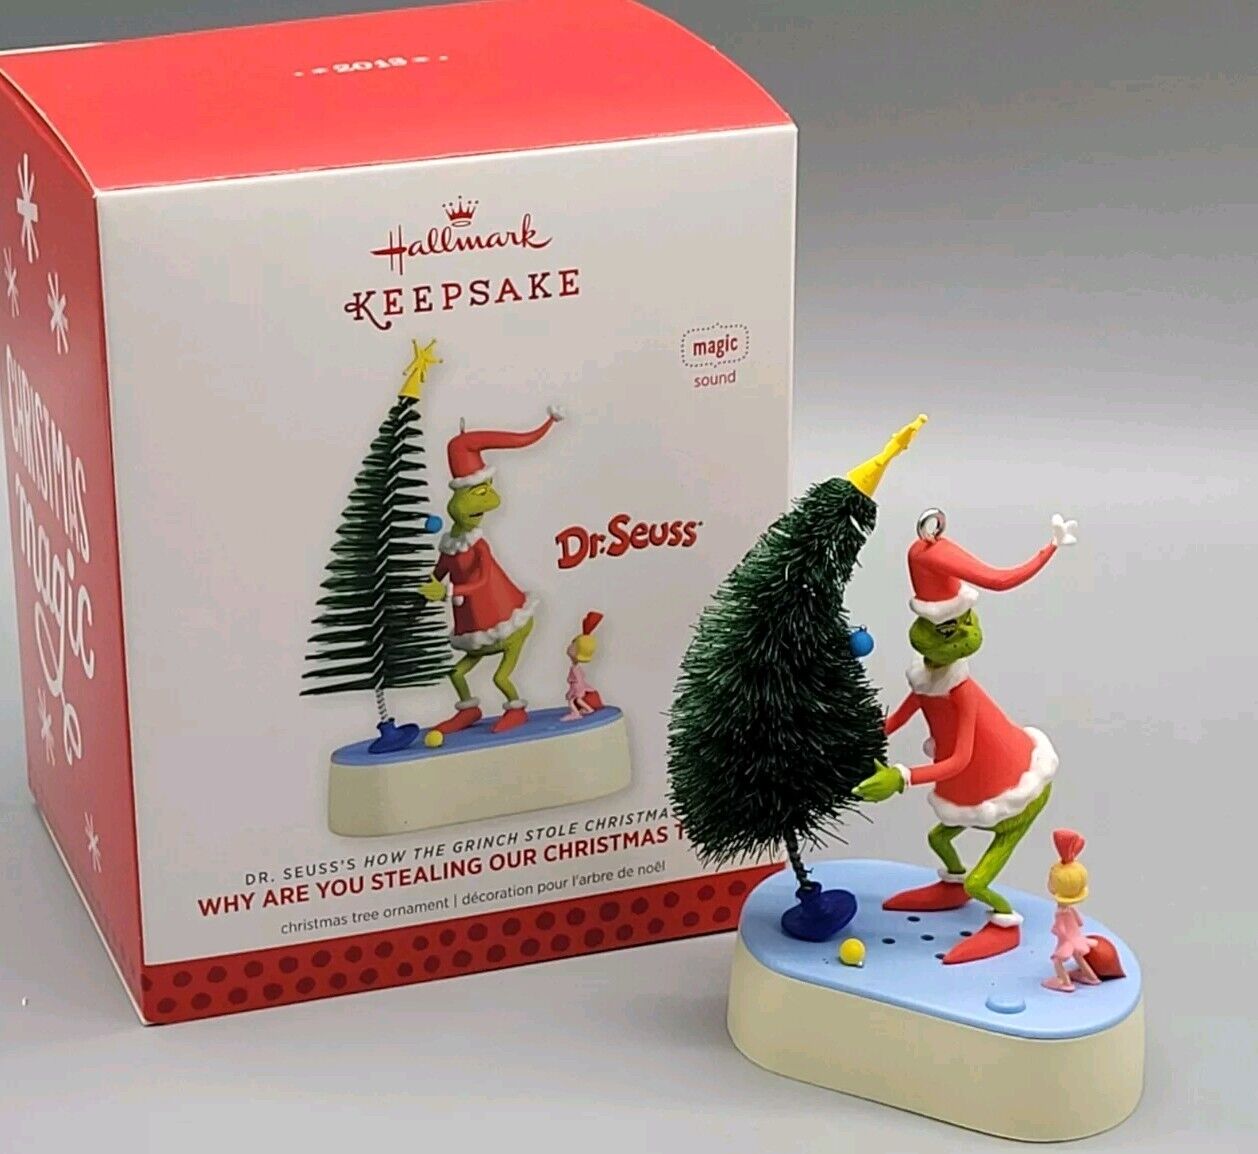 2013 GRINCH Why Are you Stealing Our Tree Hallmark Keepsake Ornament Magic Sound